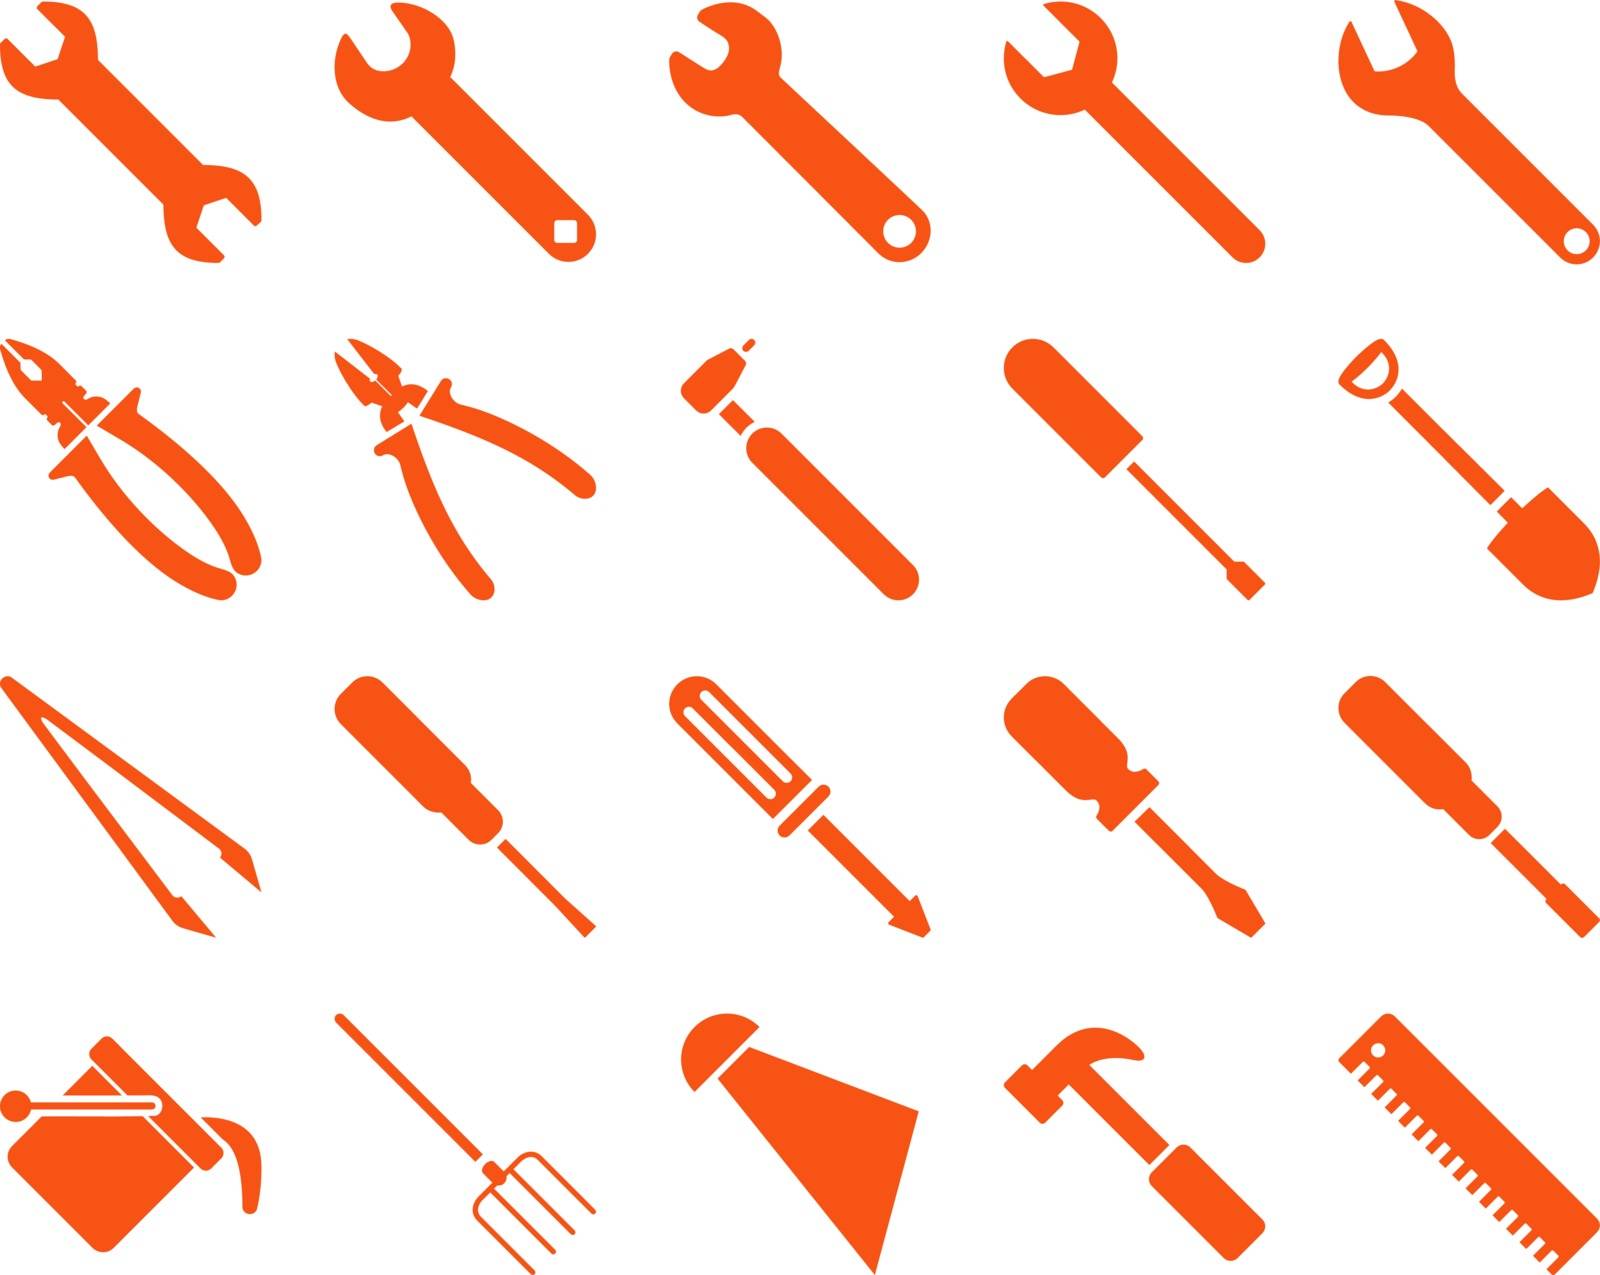 Equipment and Tools Icons. Vector set style is flat images, orange color, isolated on a white background.